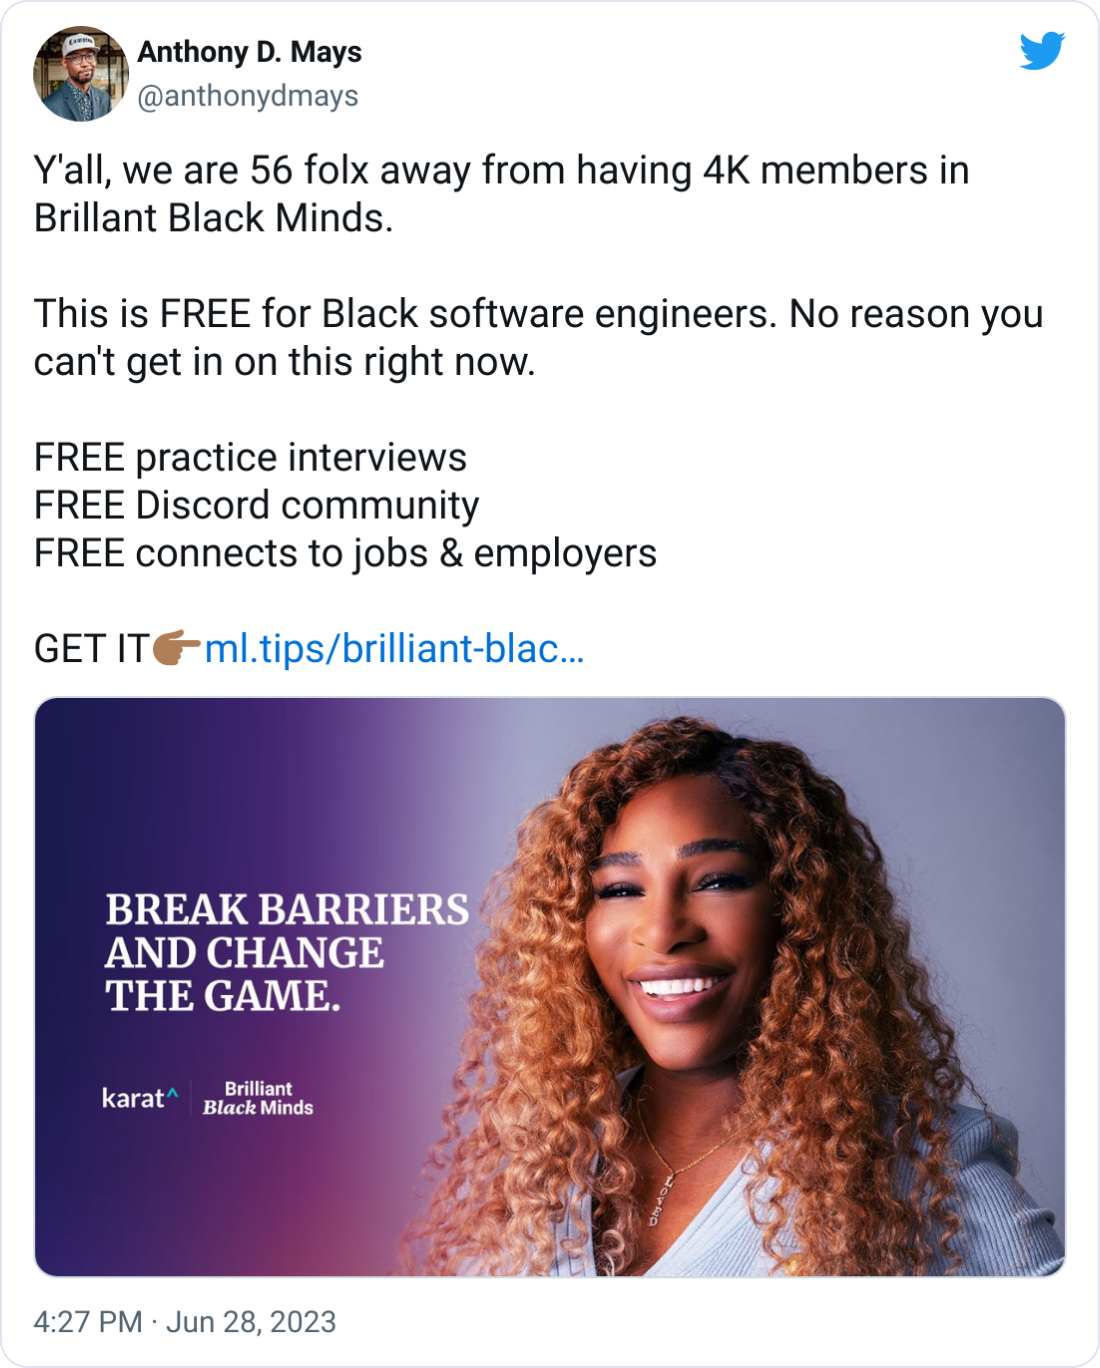 Anthony D. Mays @anthonydmays Y'all, we are 56 folx away from having 4K members in Brillant Black Minds.  This is FREE for Black software engineers. No reason you can't get in on this right now.  FREE practice interviews FREE Discord community FREE connects to jobs & employers